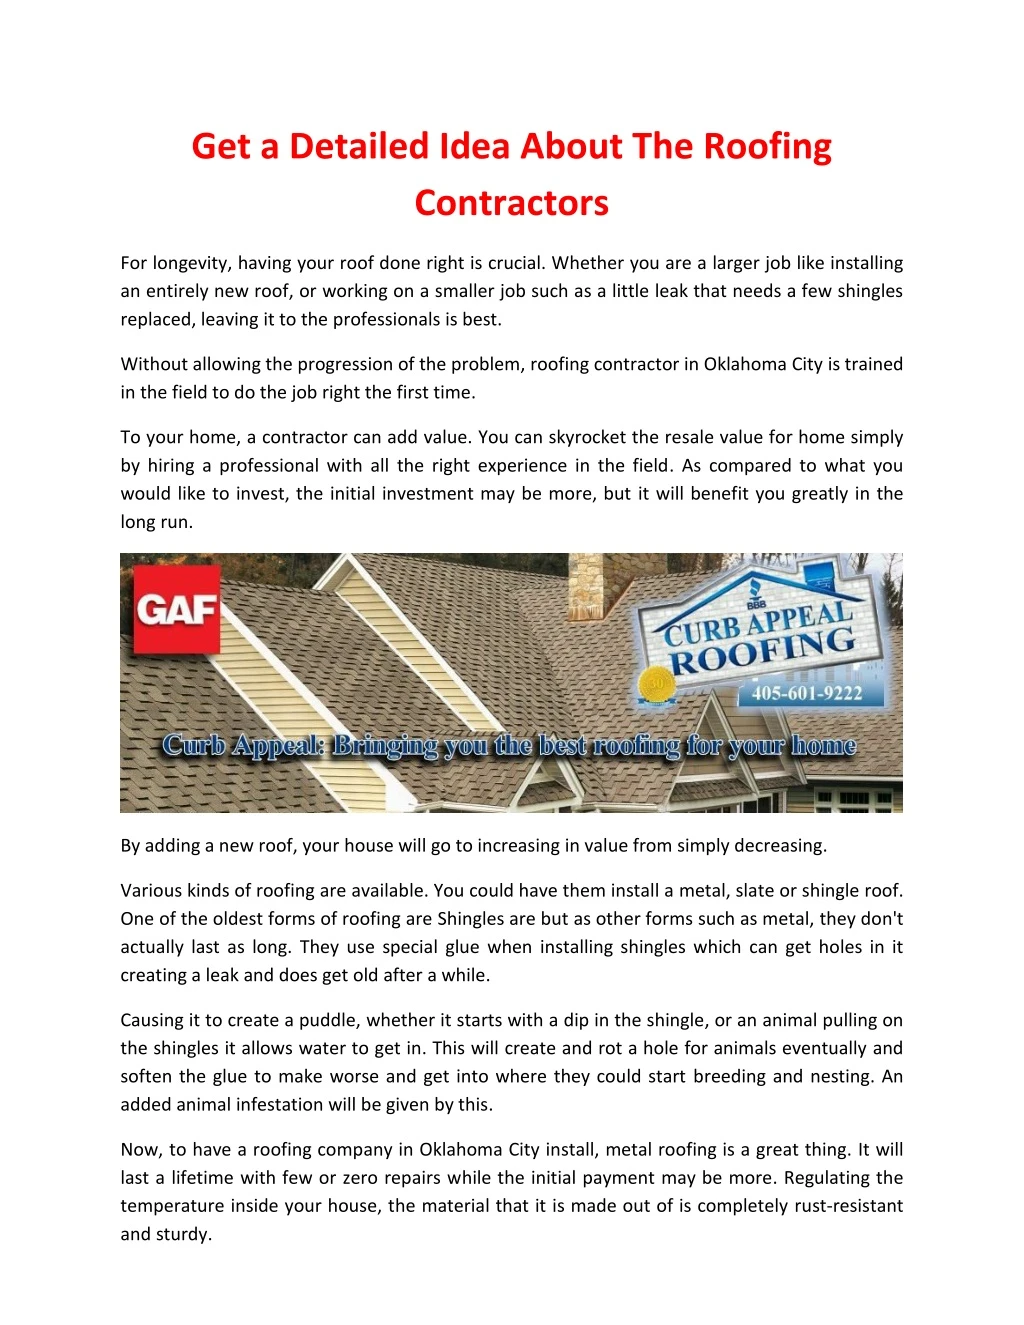 get a detailed idea about the roofing contractors